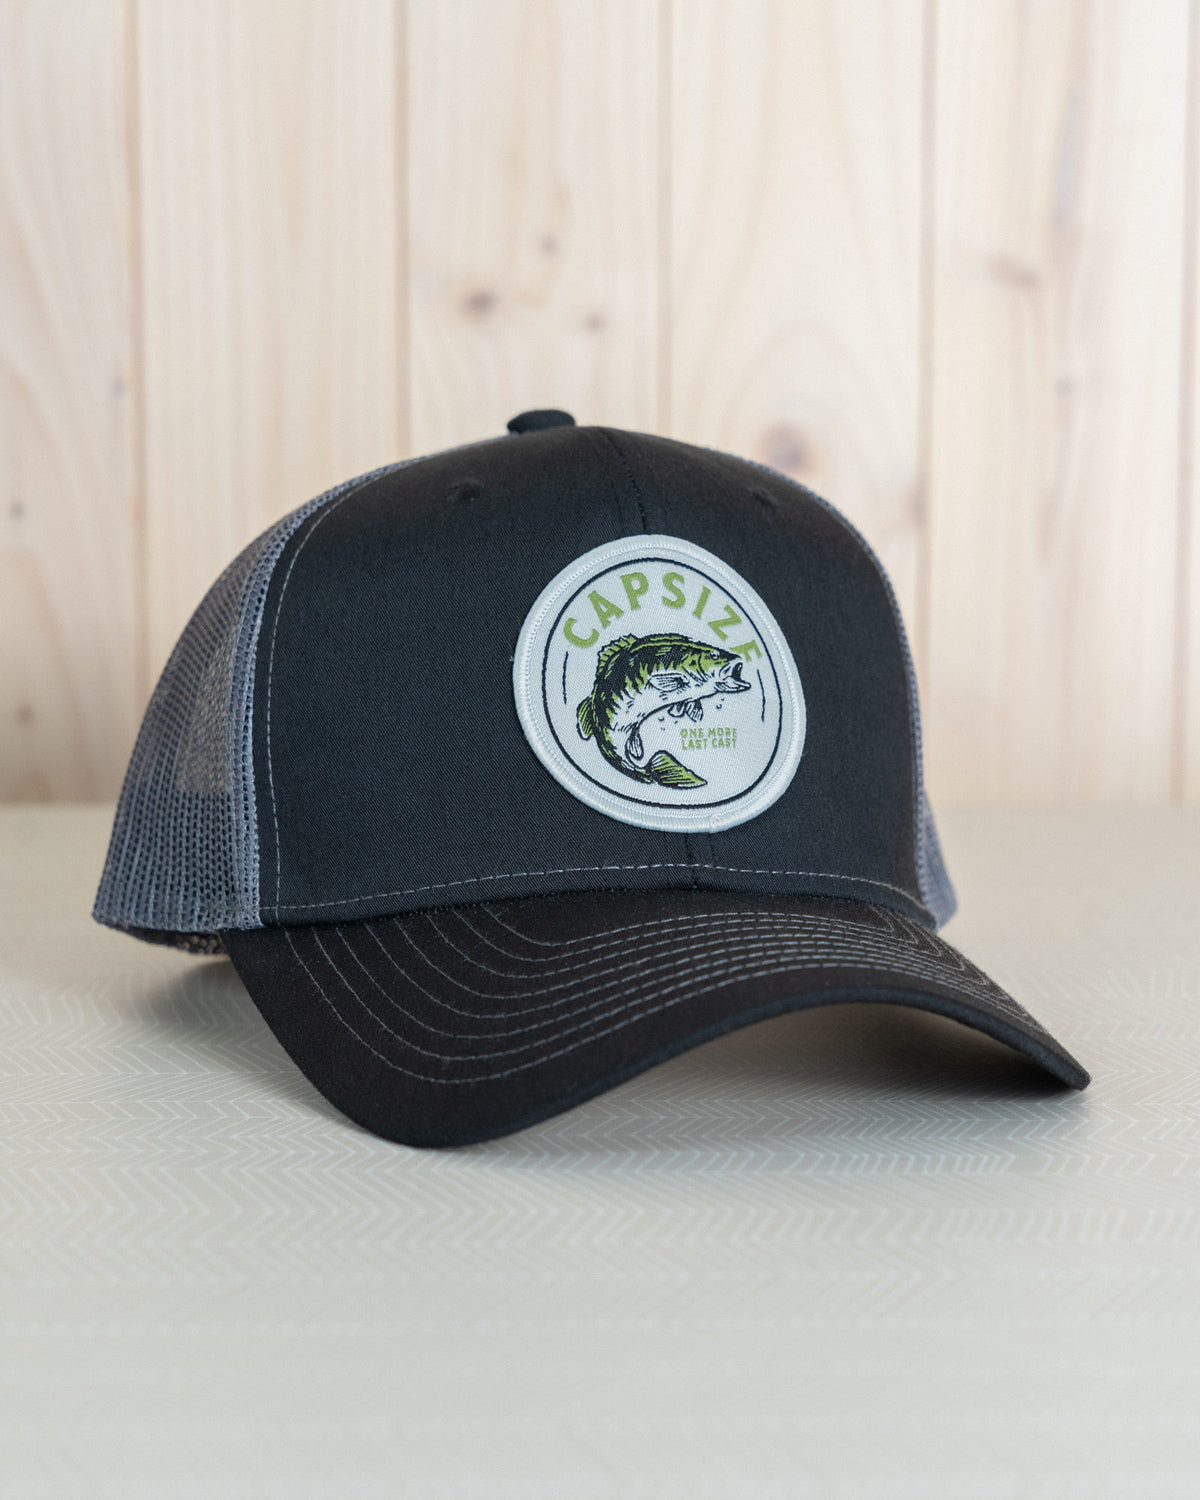 Fly Fishing Hats  Capsize Fly Fishing Tagged Fly Fishing